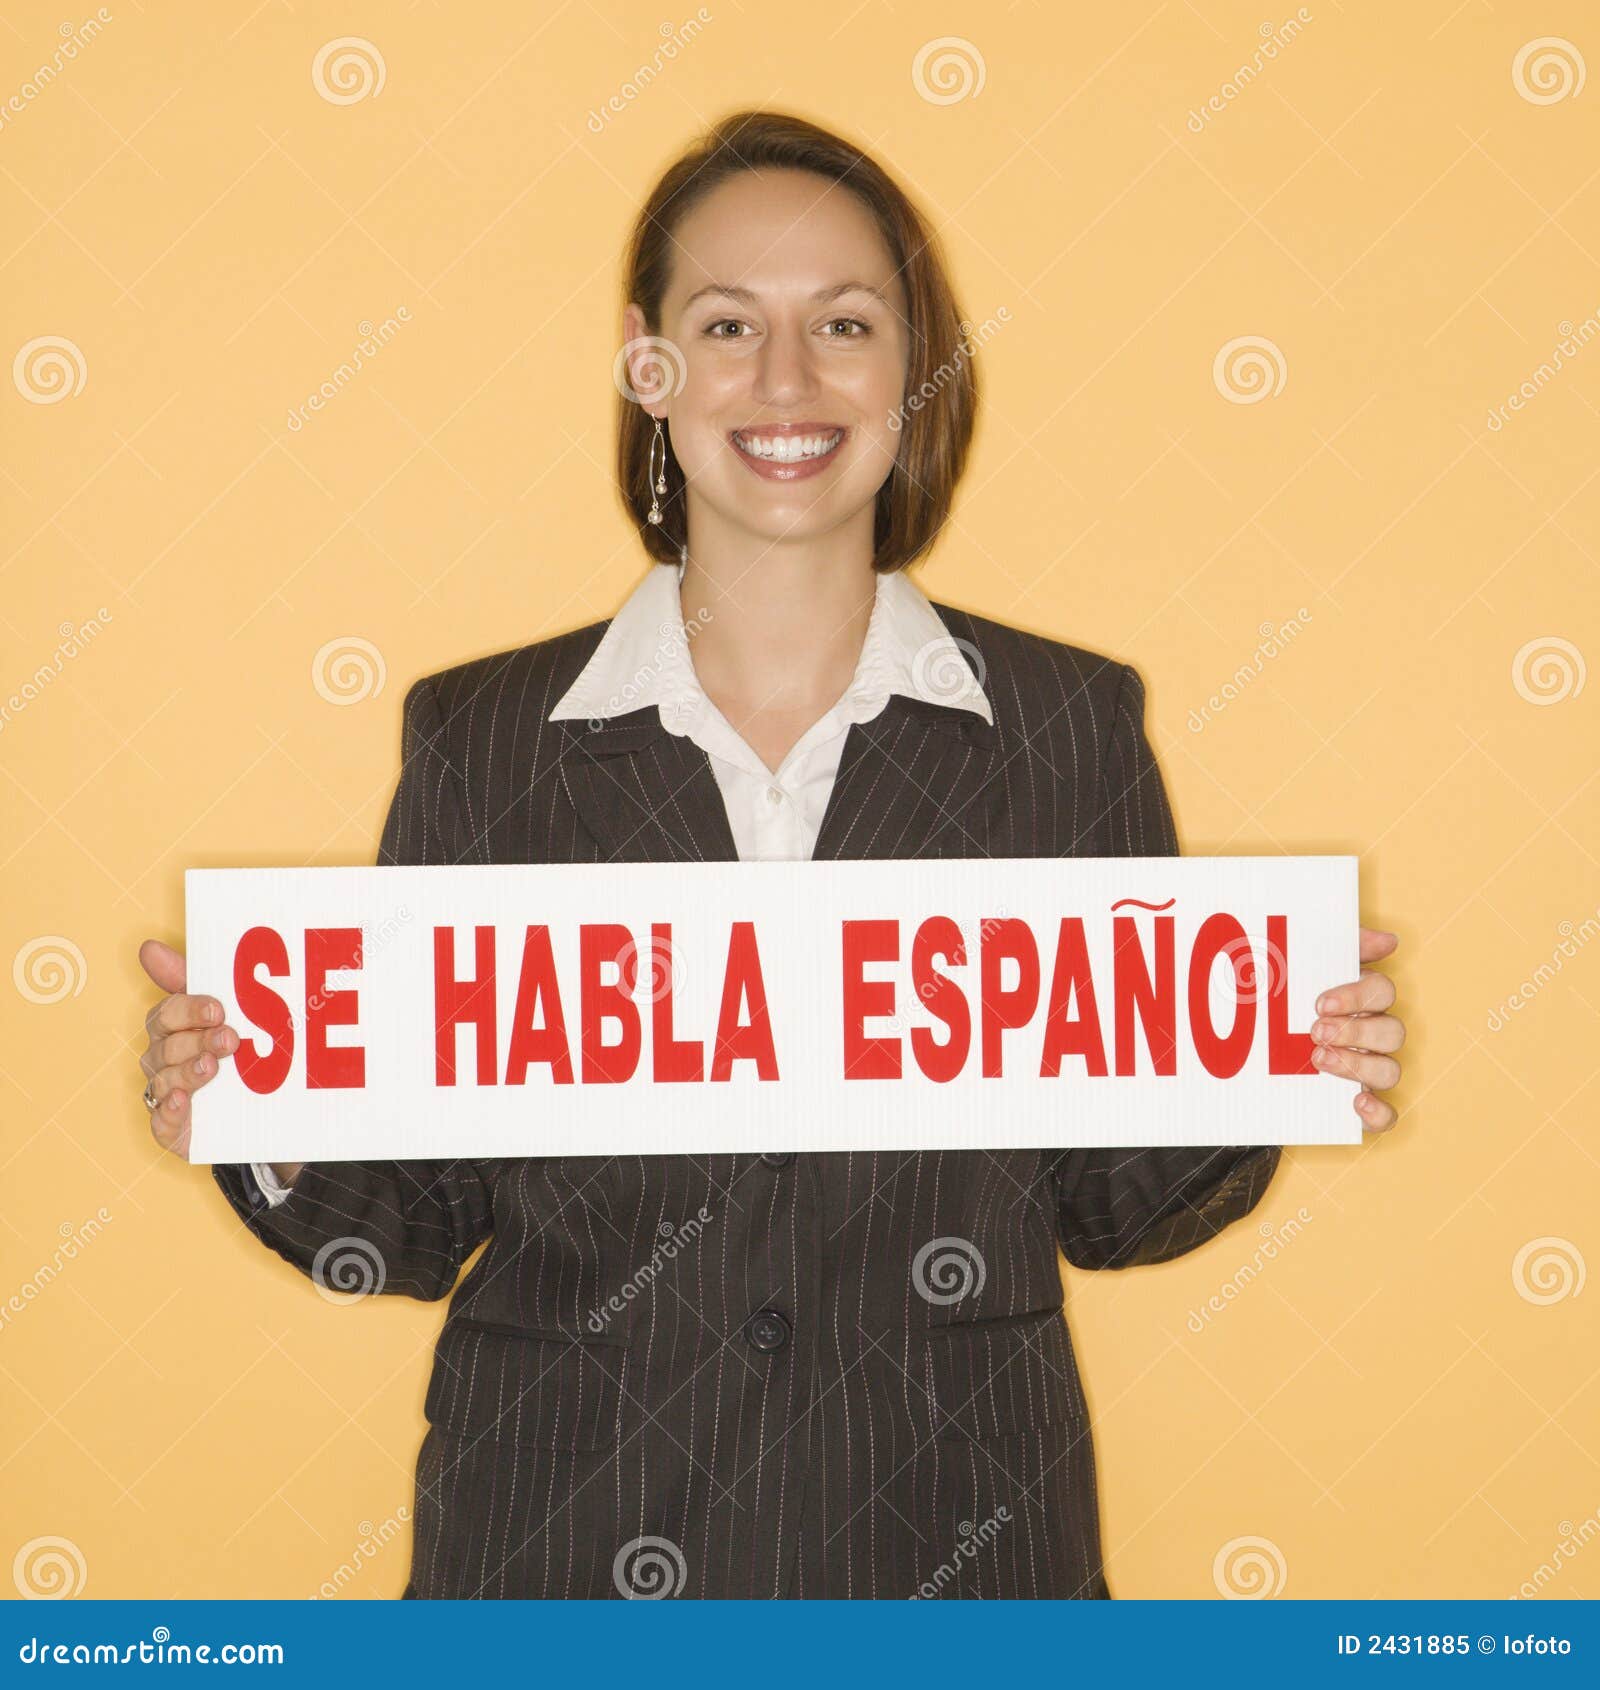 woman holding bilingual sign